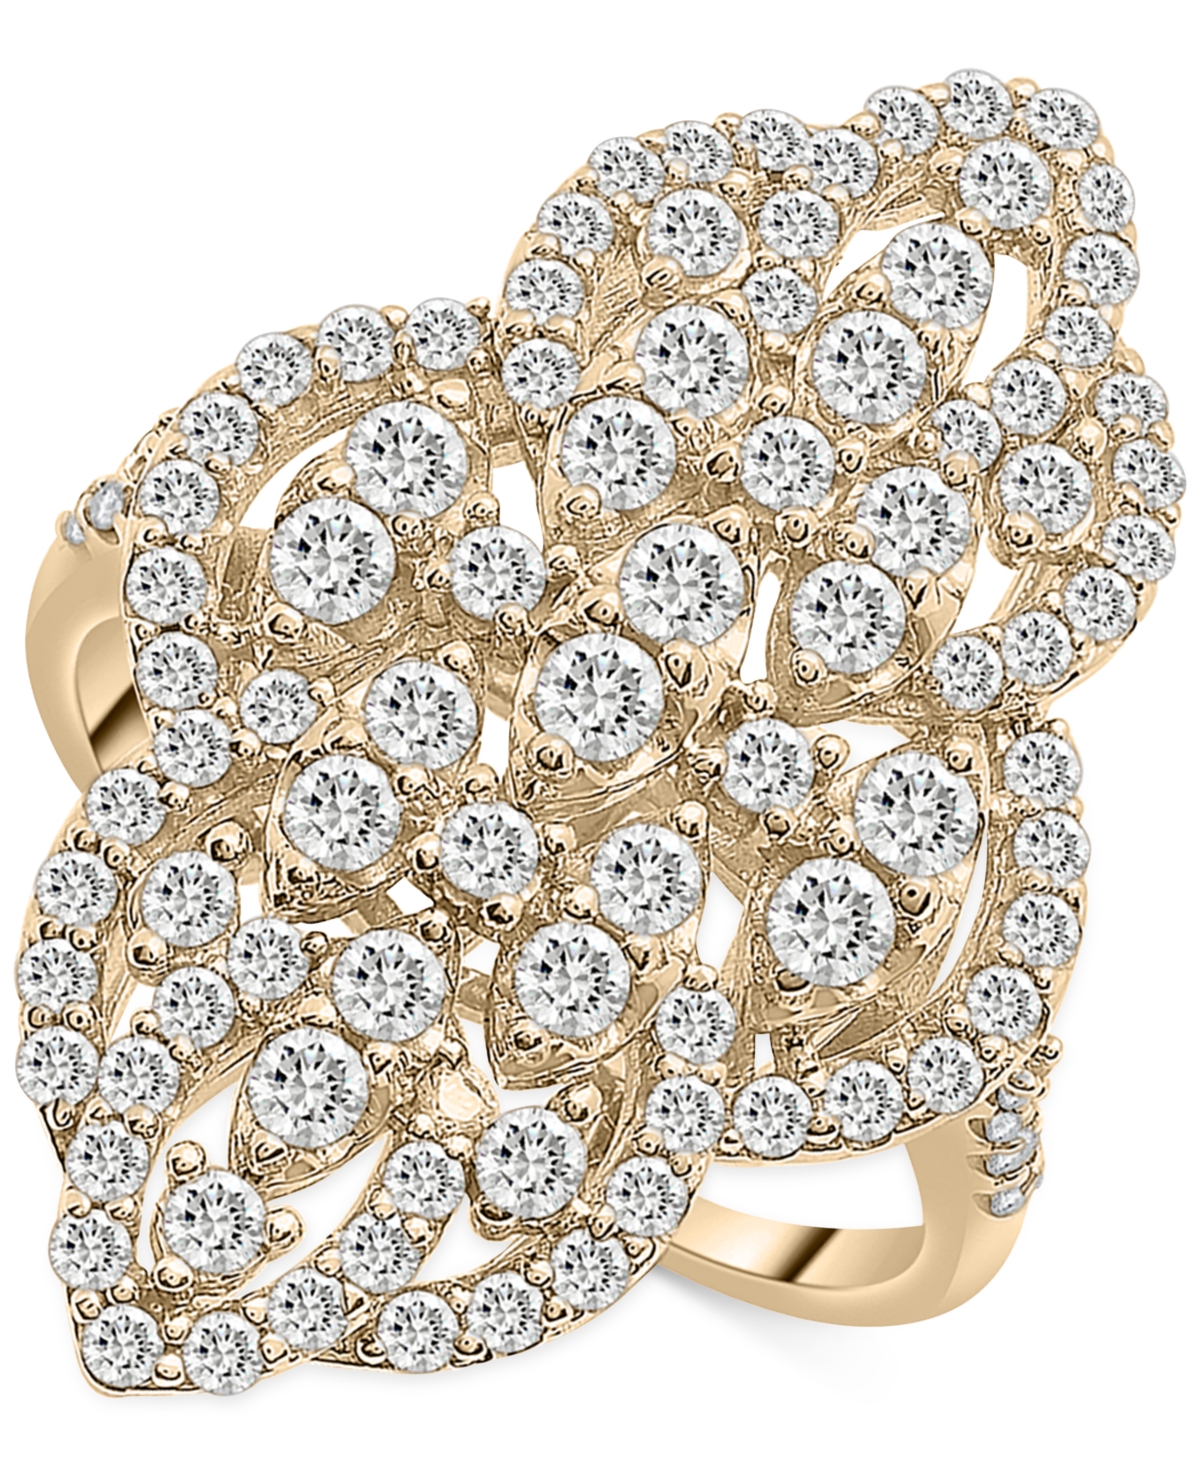 Diamond Filigree Cluster Ring (1-1/2 ct. t.w.) in 14k White Gold or 14k Yellow Gold, Created for Macy's - Yellow Gold